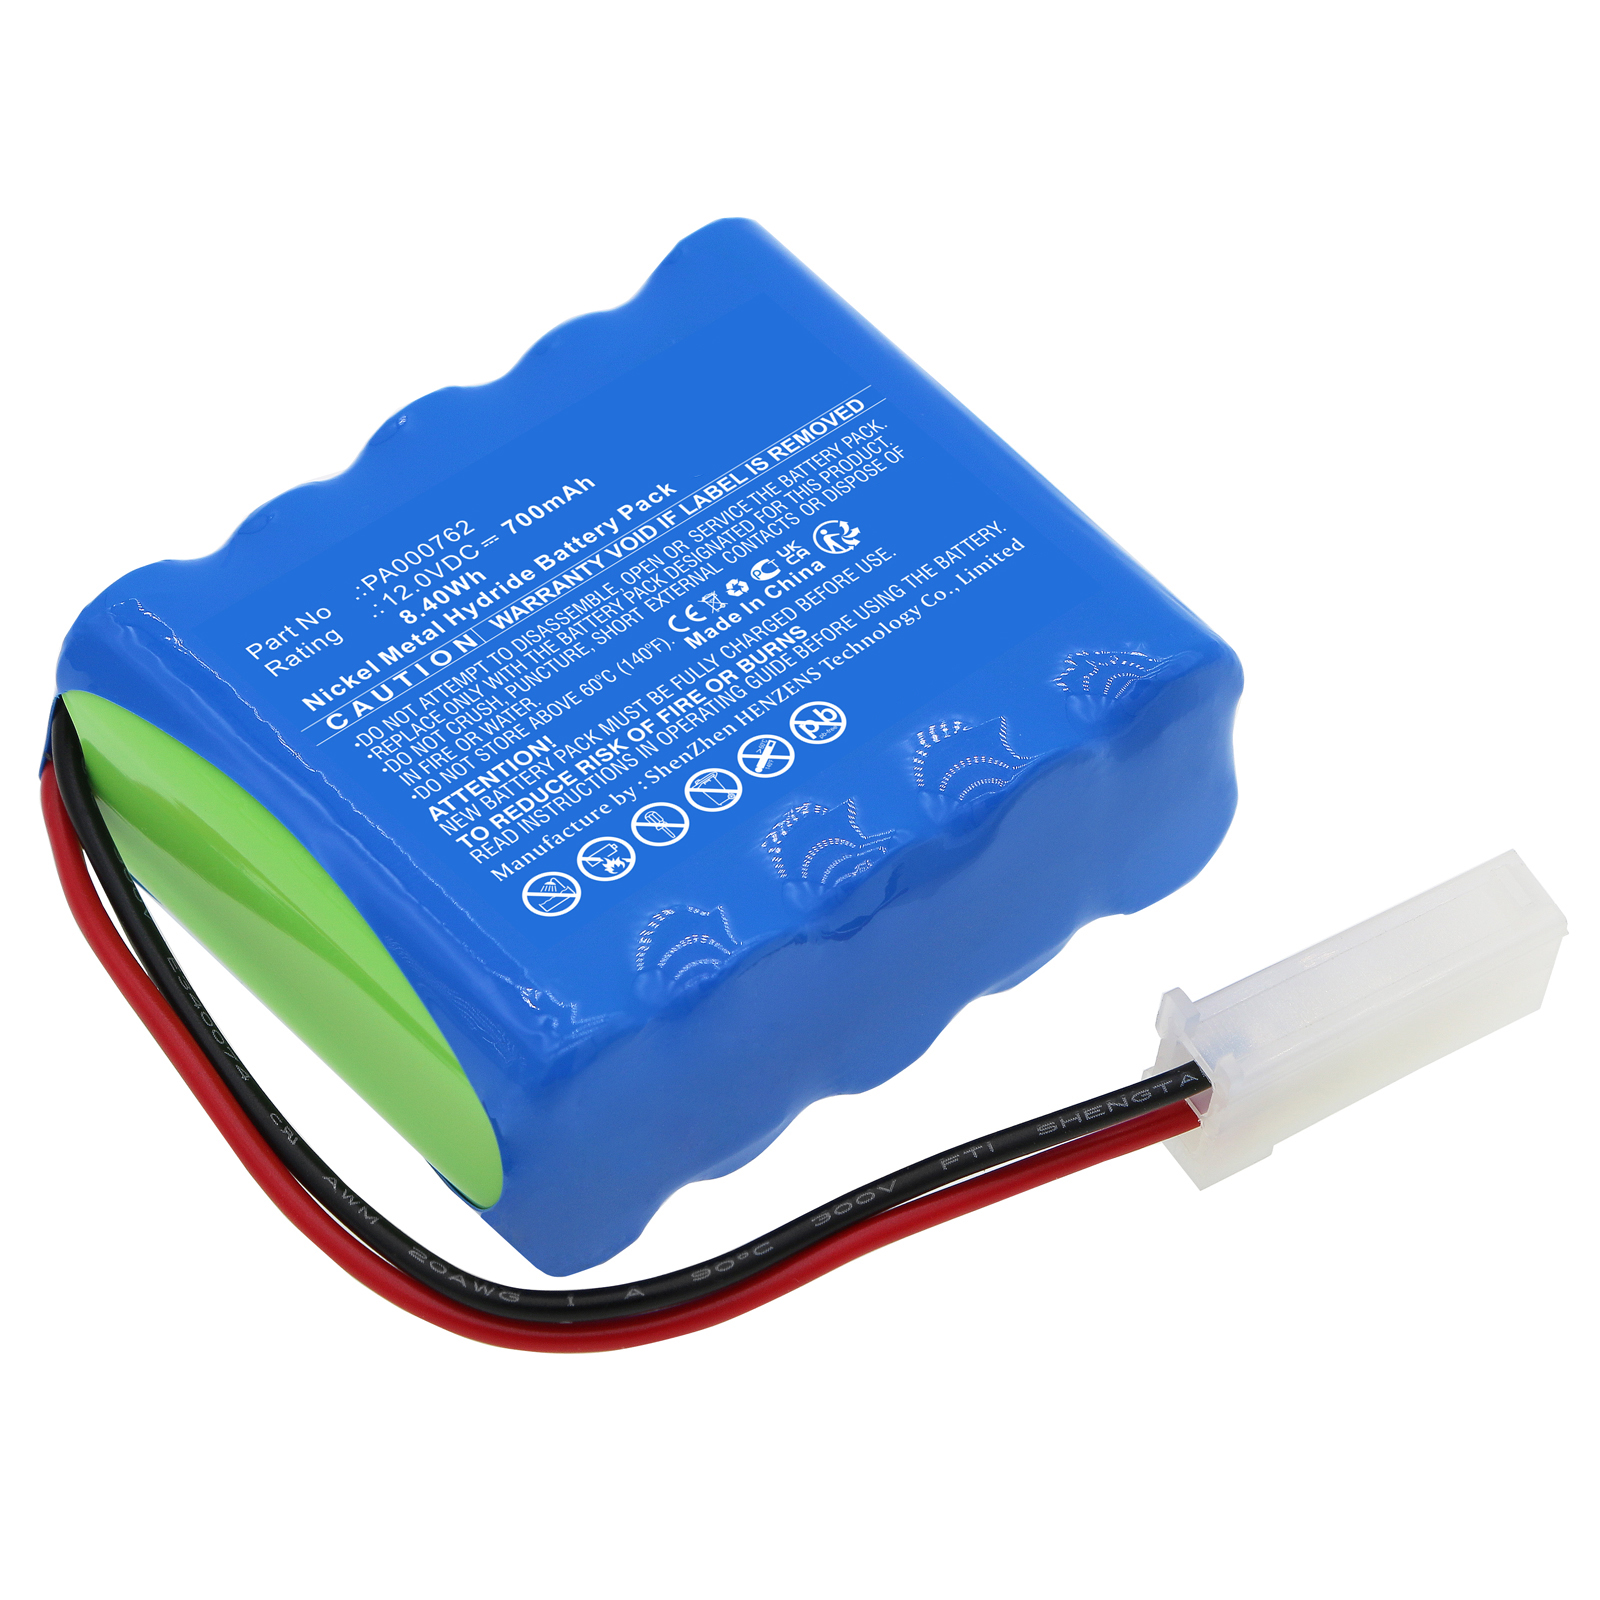 Synergy Digital Smart Home Battery, Compatible with Roma PA000762 Smart Home Battery (Ni-MH, 12V, 700mAh)